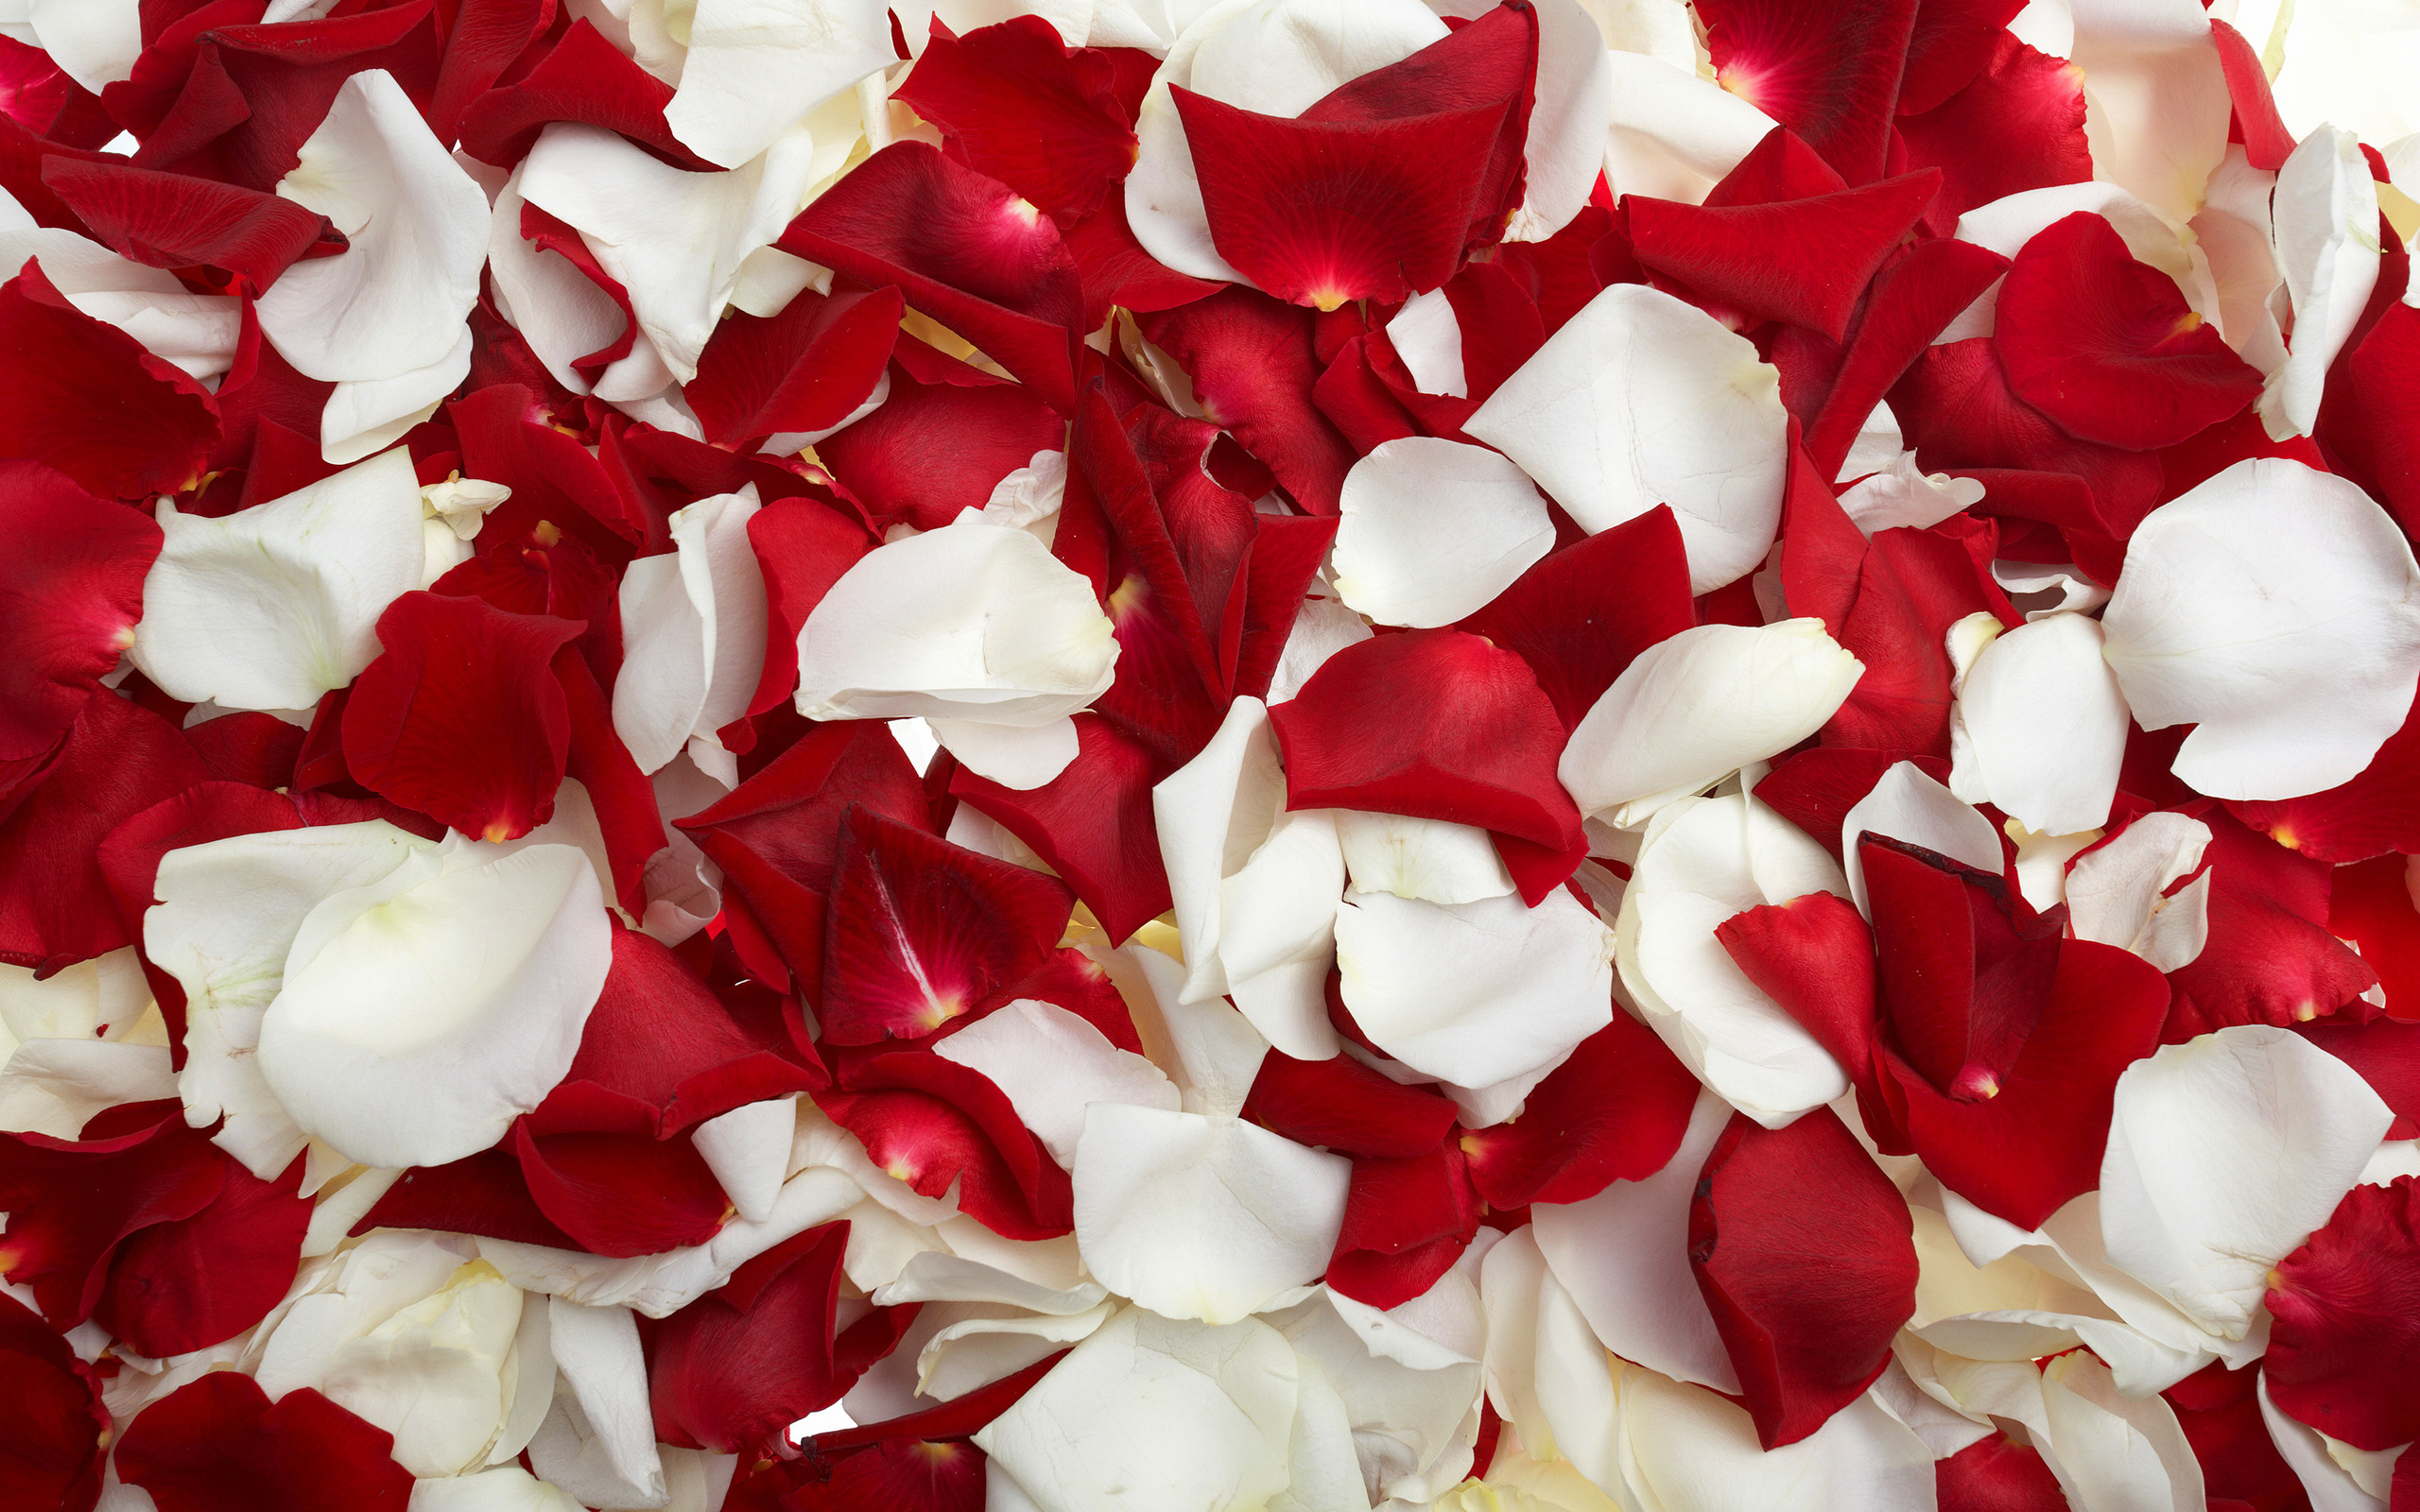 Red and White Rose Petals Wallpapers Pictures